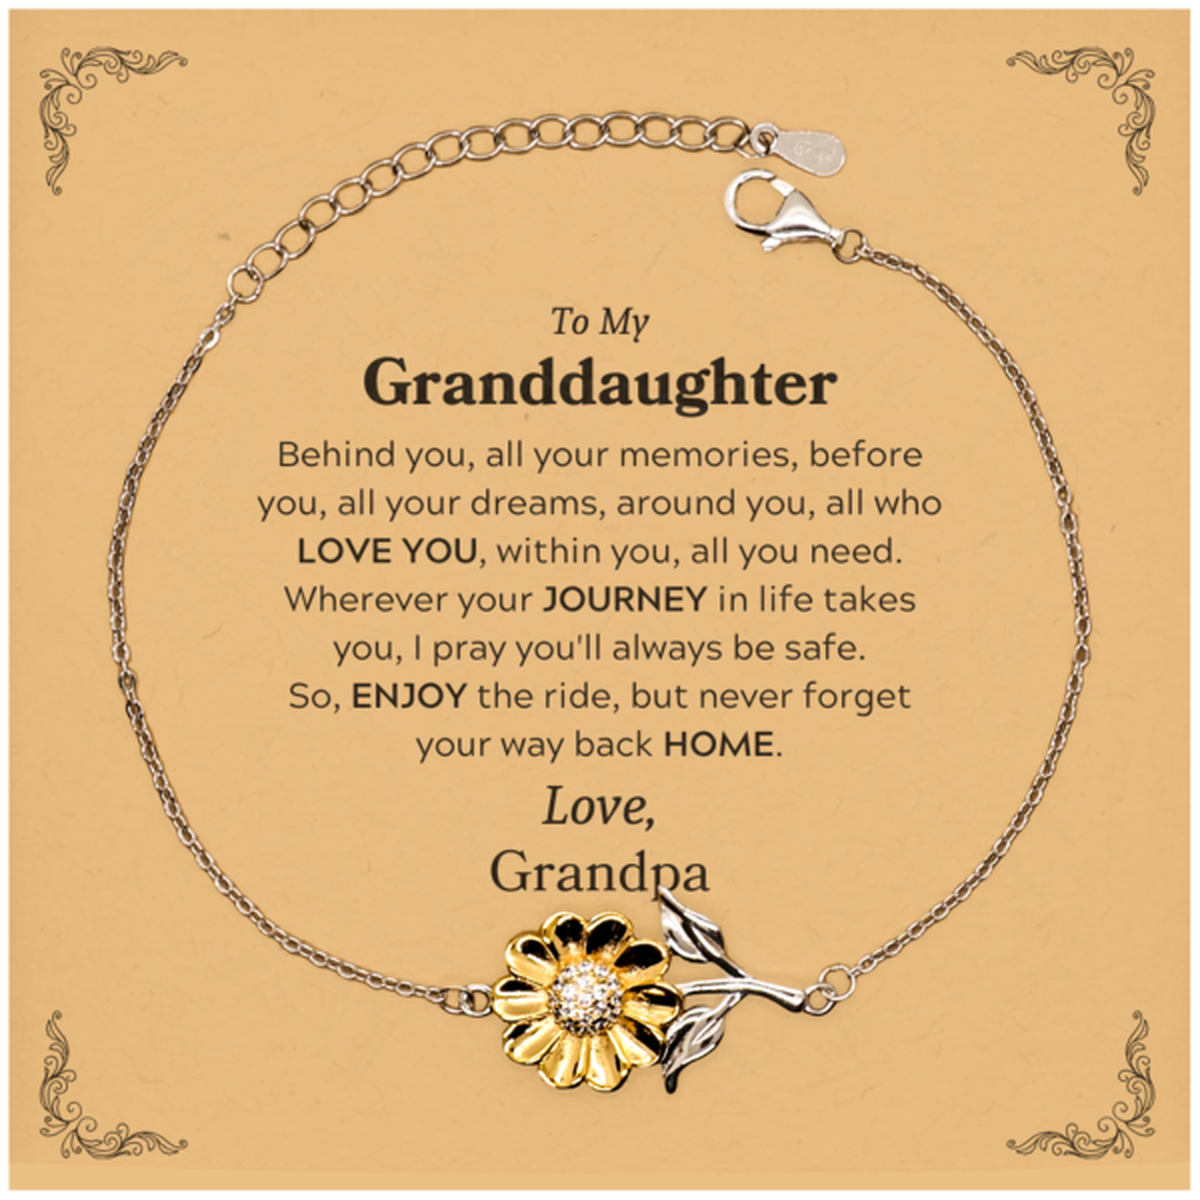 To My Granddaughter Graduation Gifts from Grandpa, Granddaughter Sunflower Bracelet Christmas Birthday Gifts for Granddaughter Behind you, all your memories, before you, all your dreams. Love, Grandpa